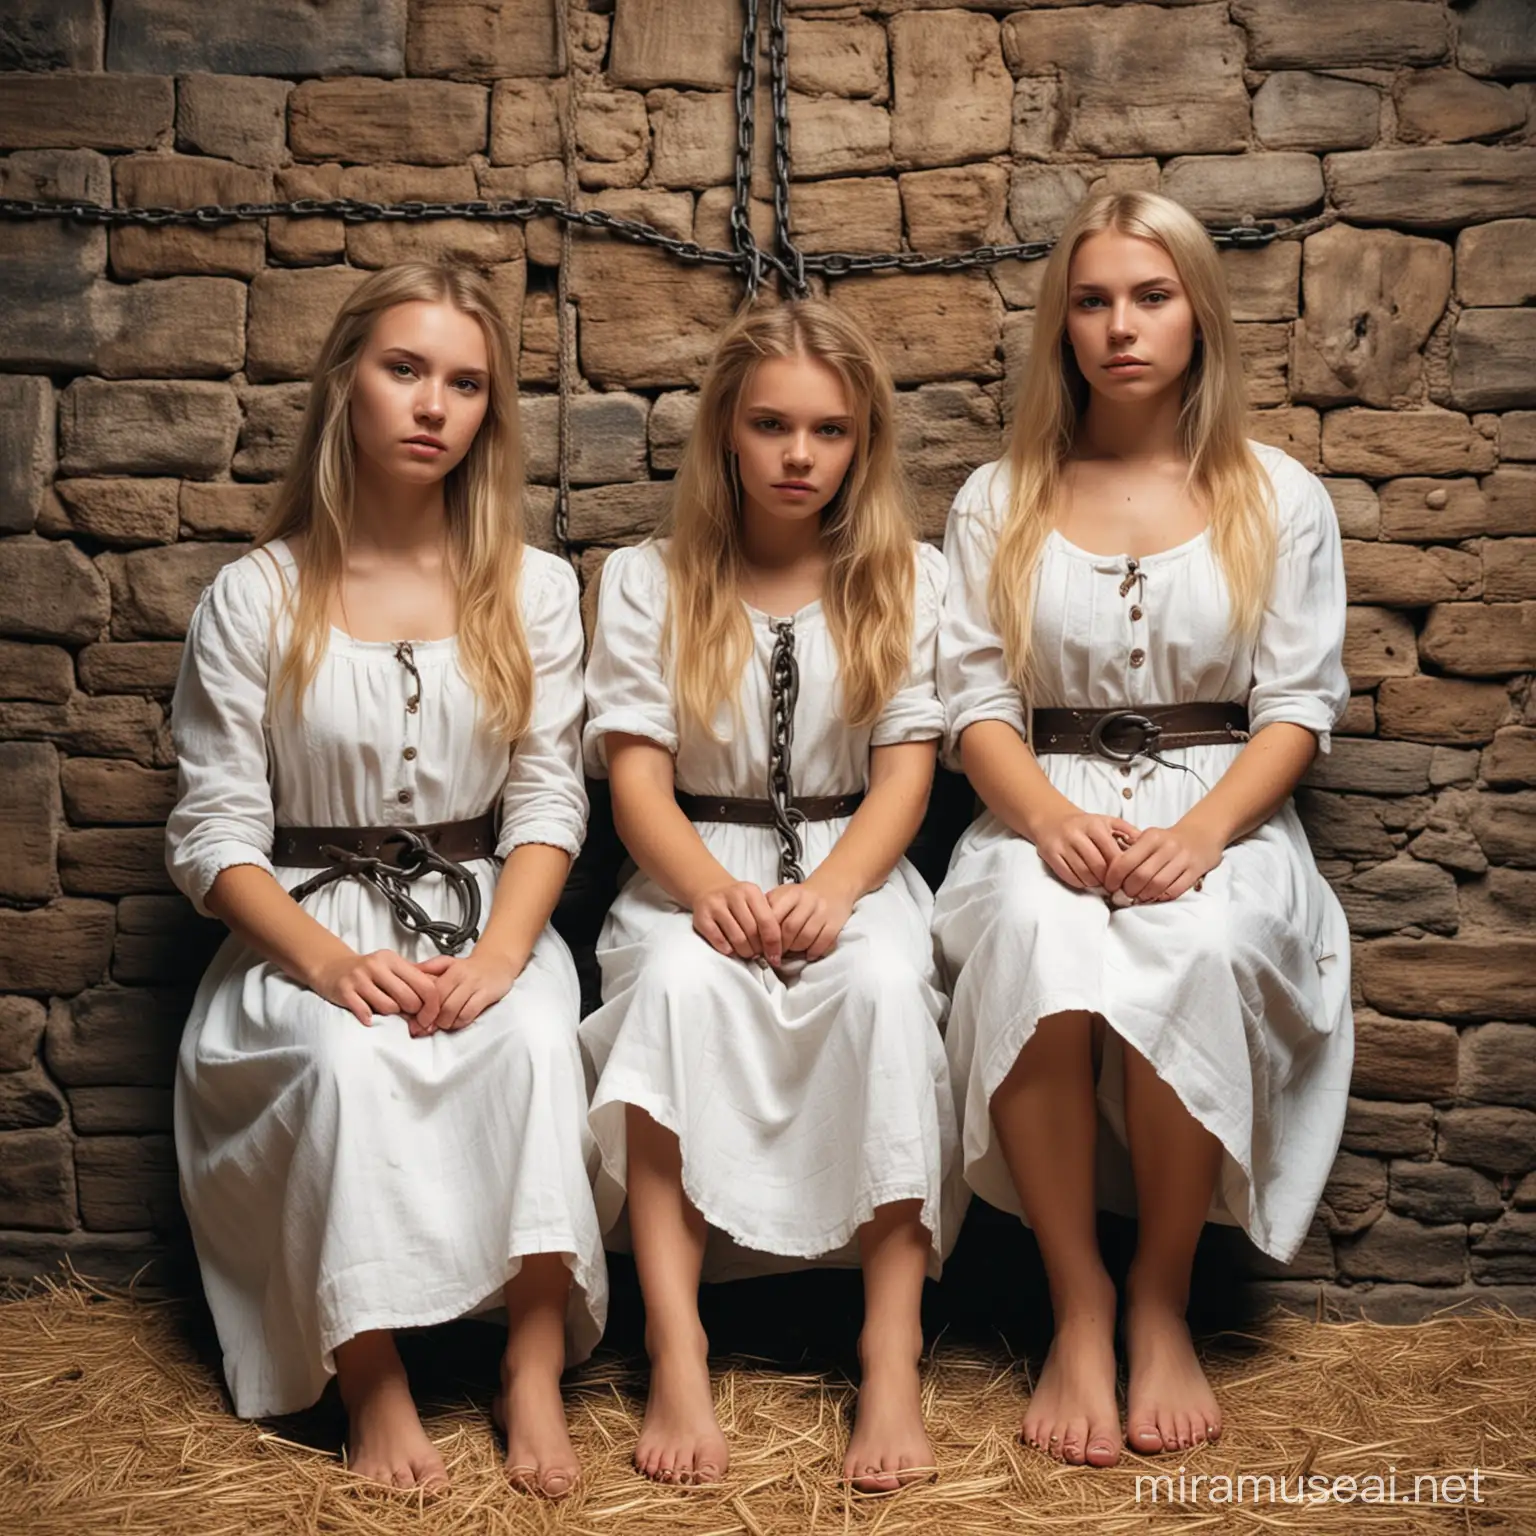 Medieval Dungeon Captive Peasant Girls Chained to Wall